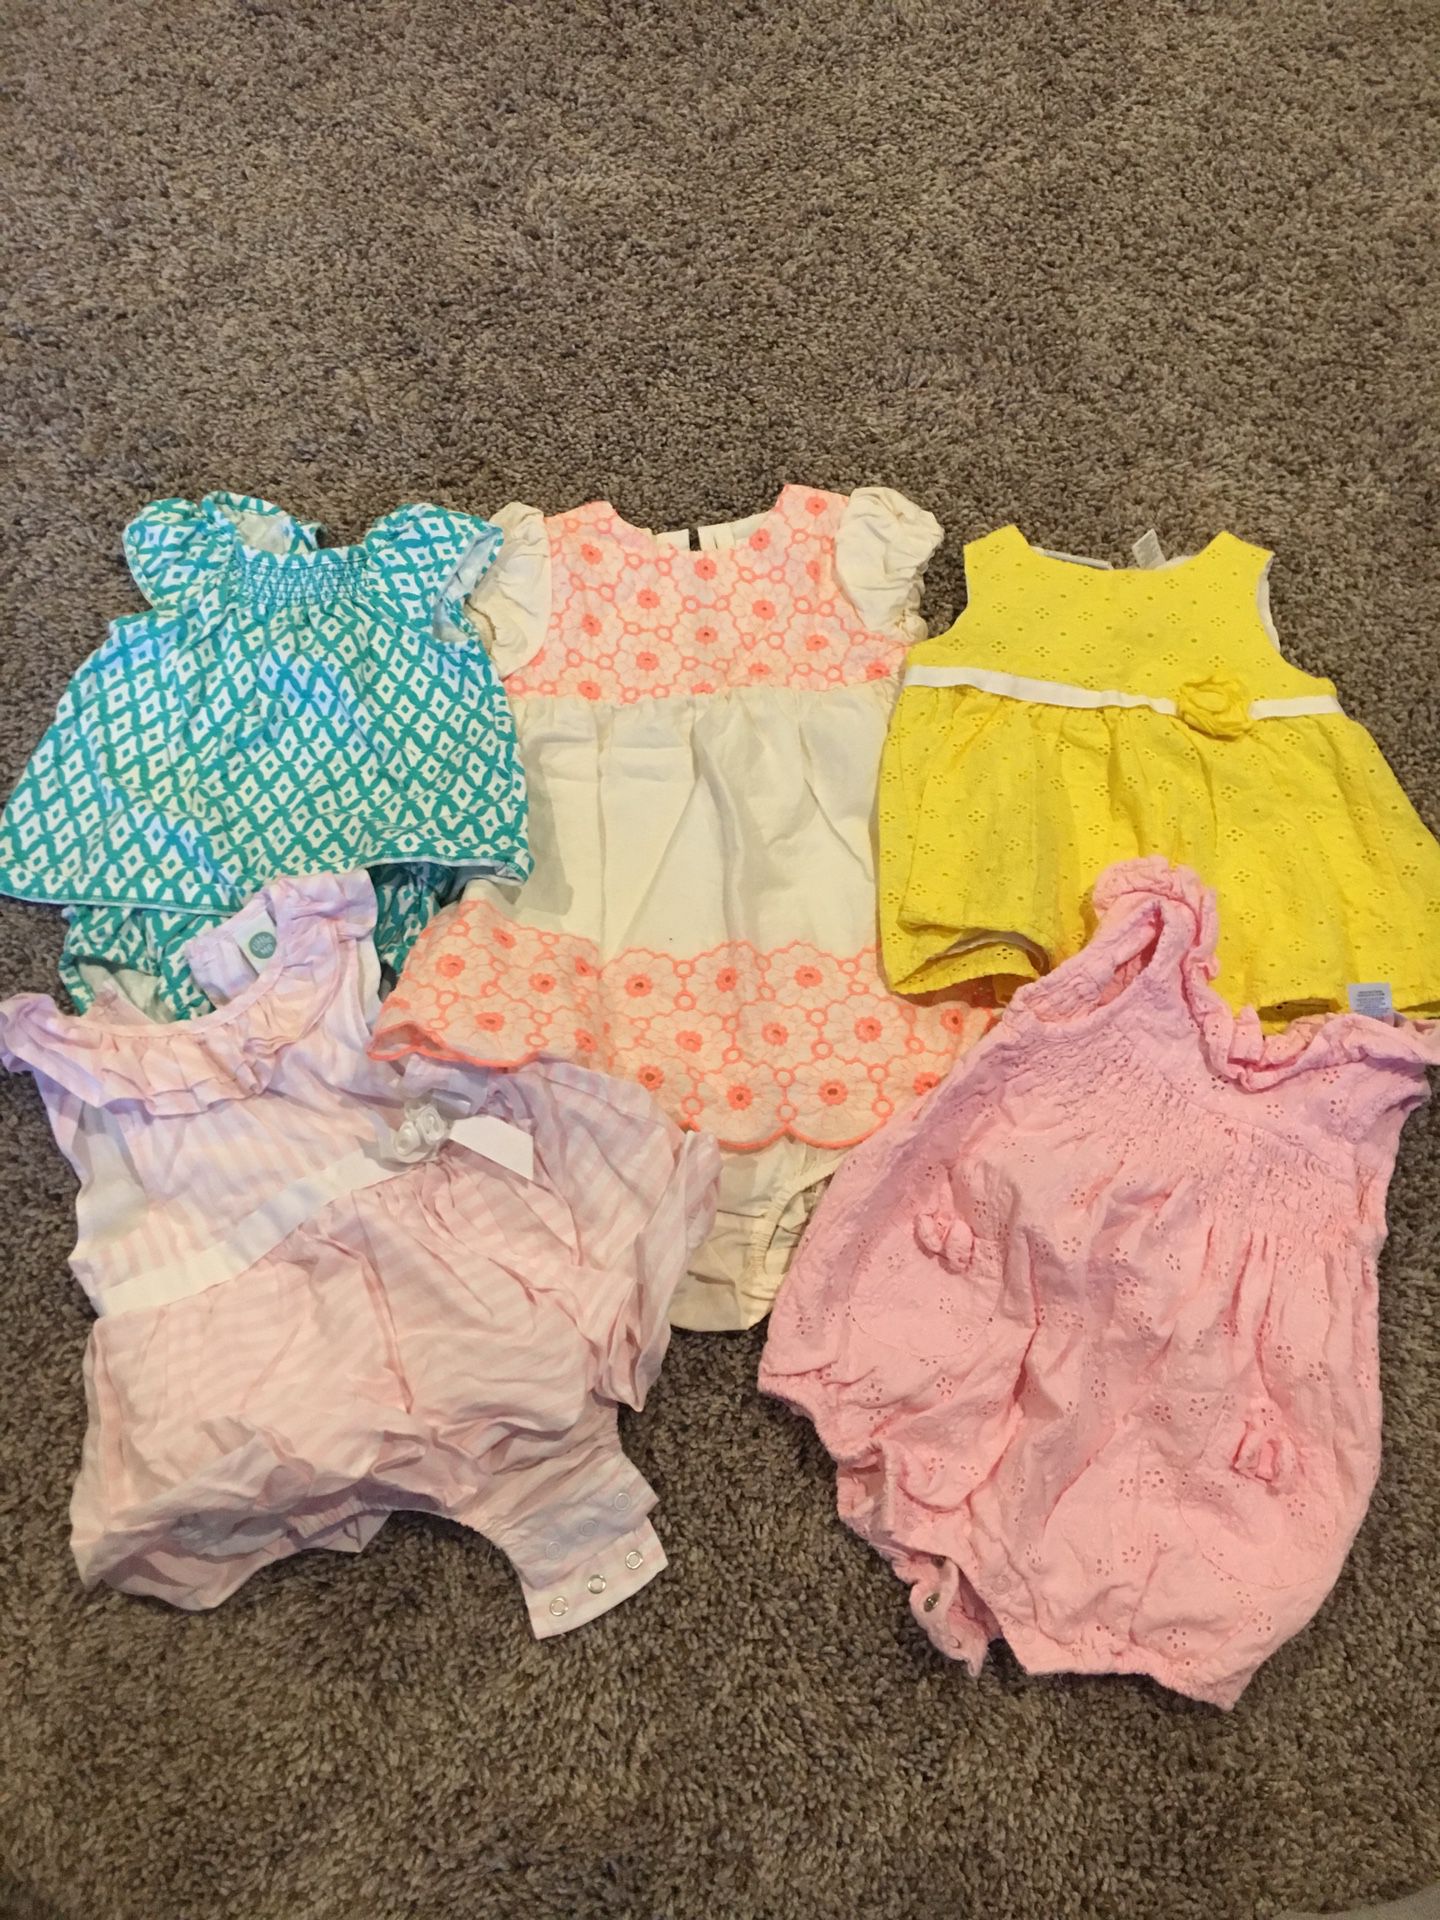 Baby Girl Clothes size 12 months